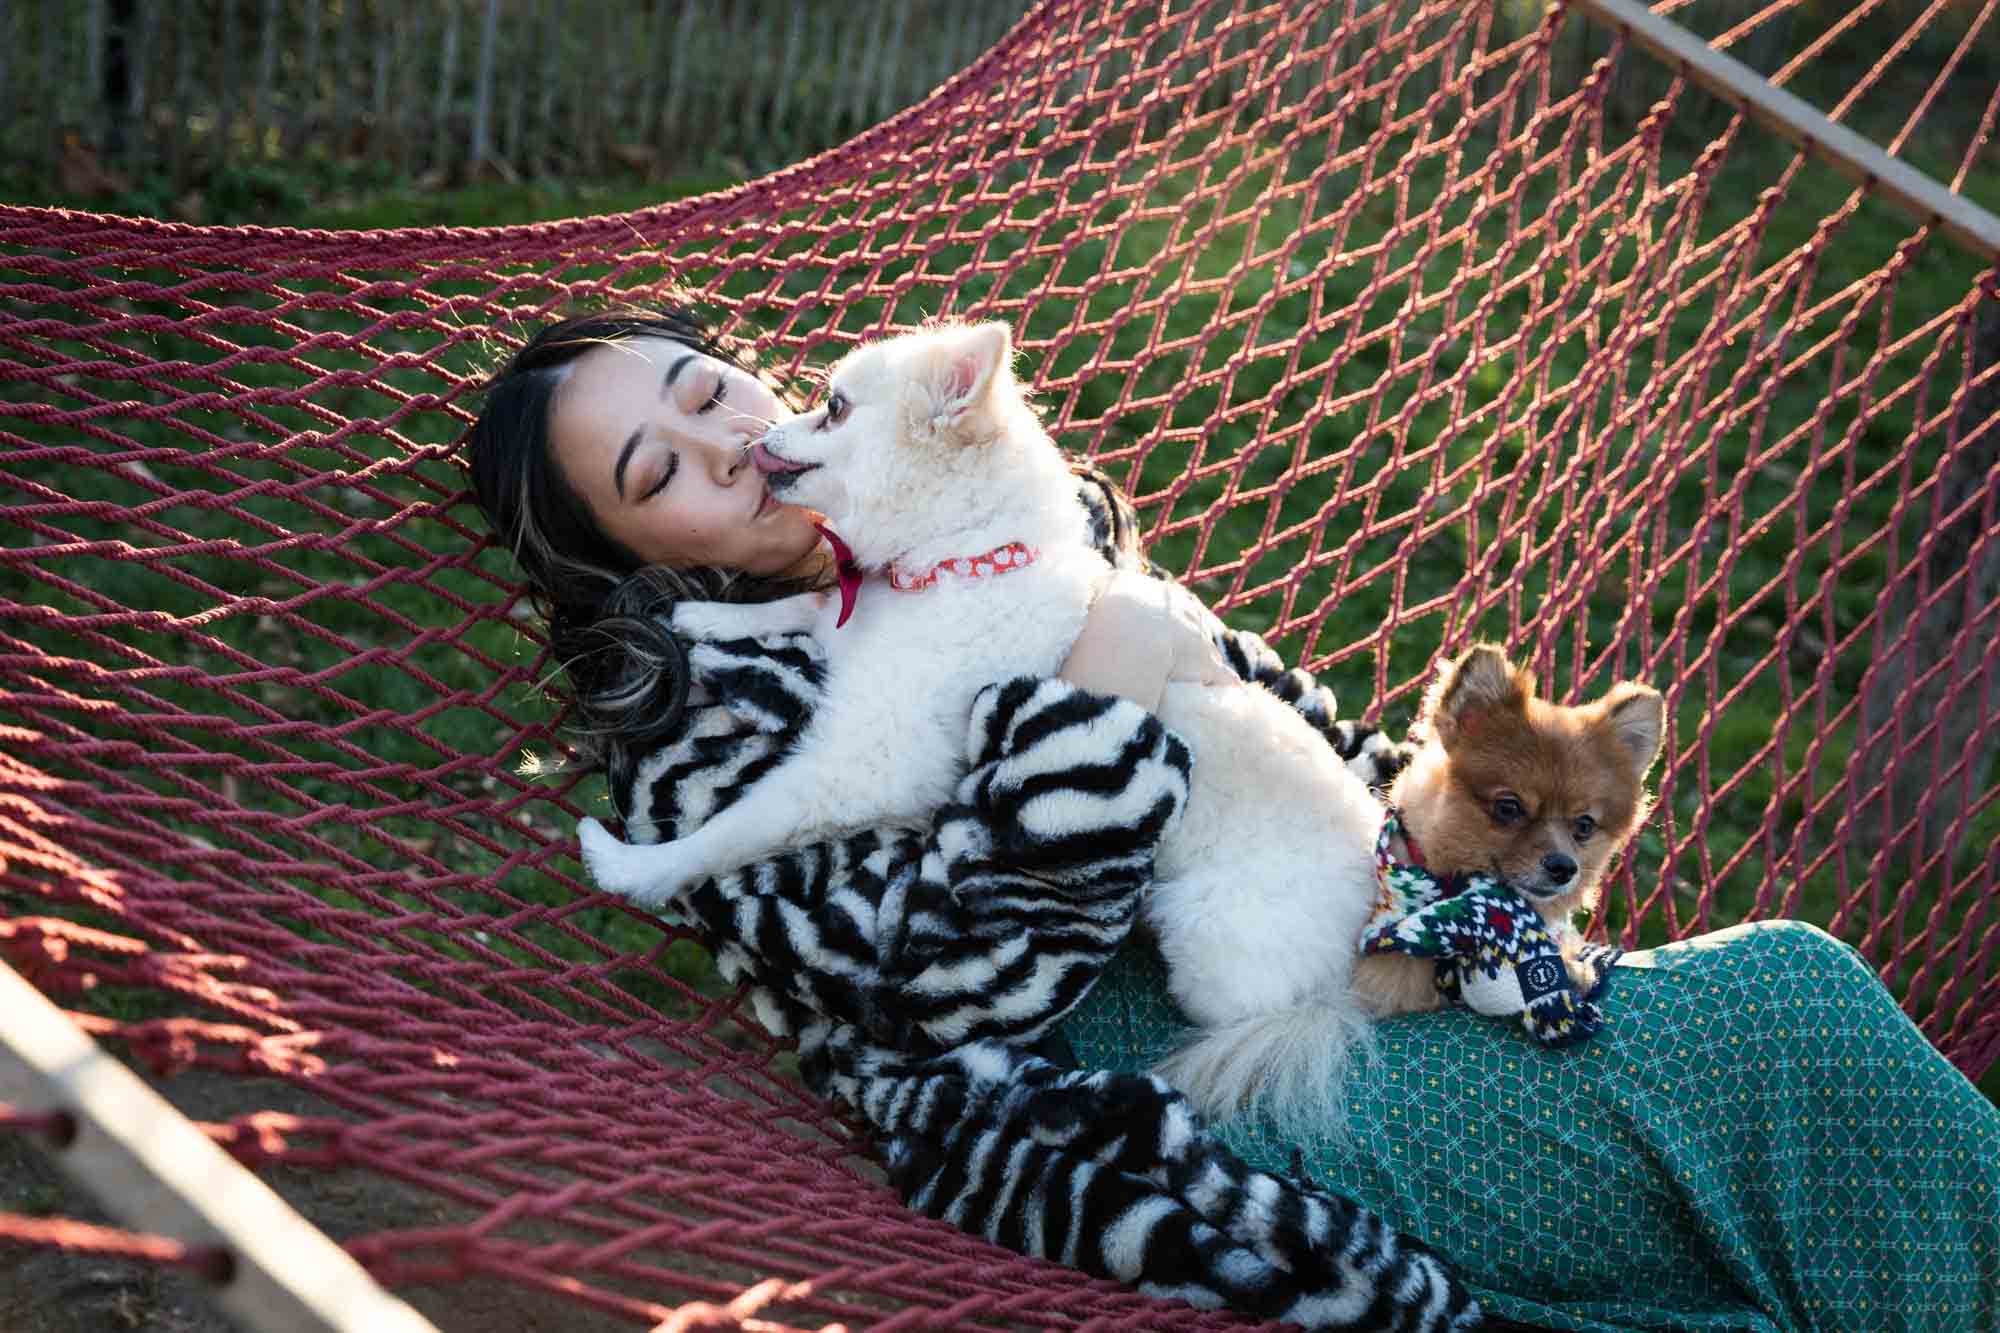 Pet portraits on Governors Island of woman sitting in hammock with two Pomeranian dogs